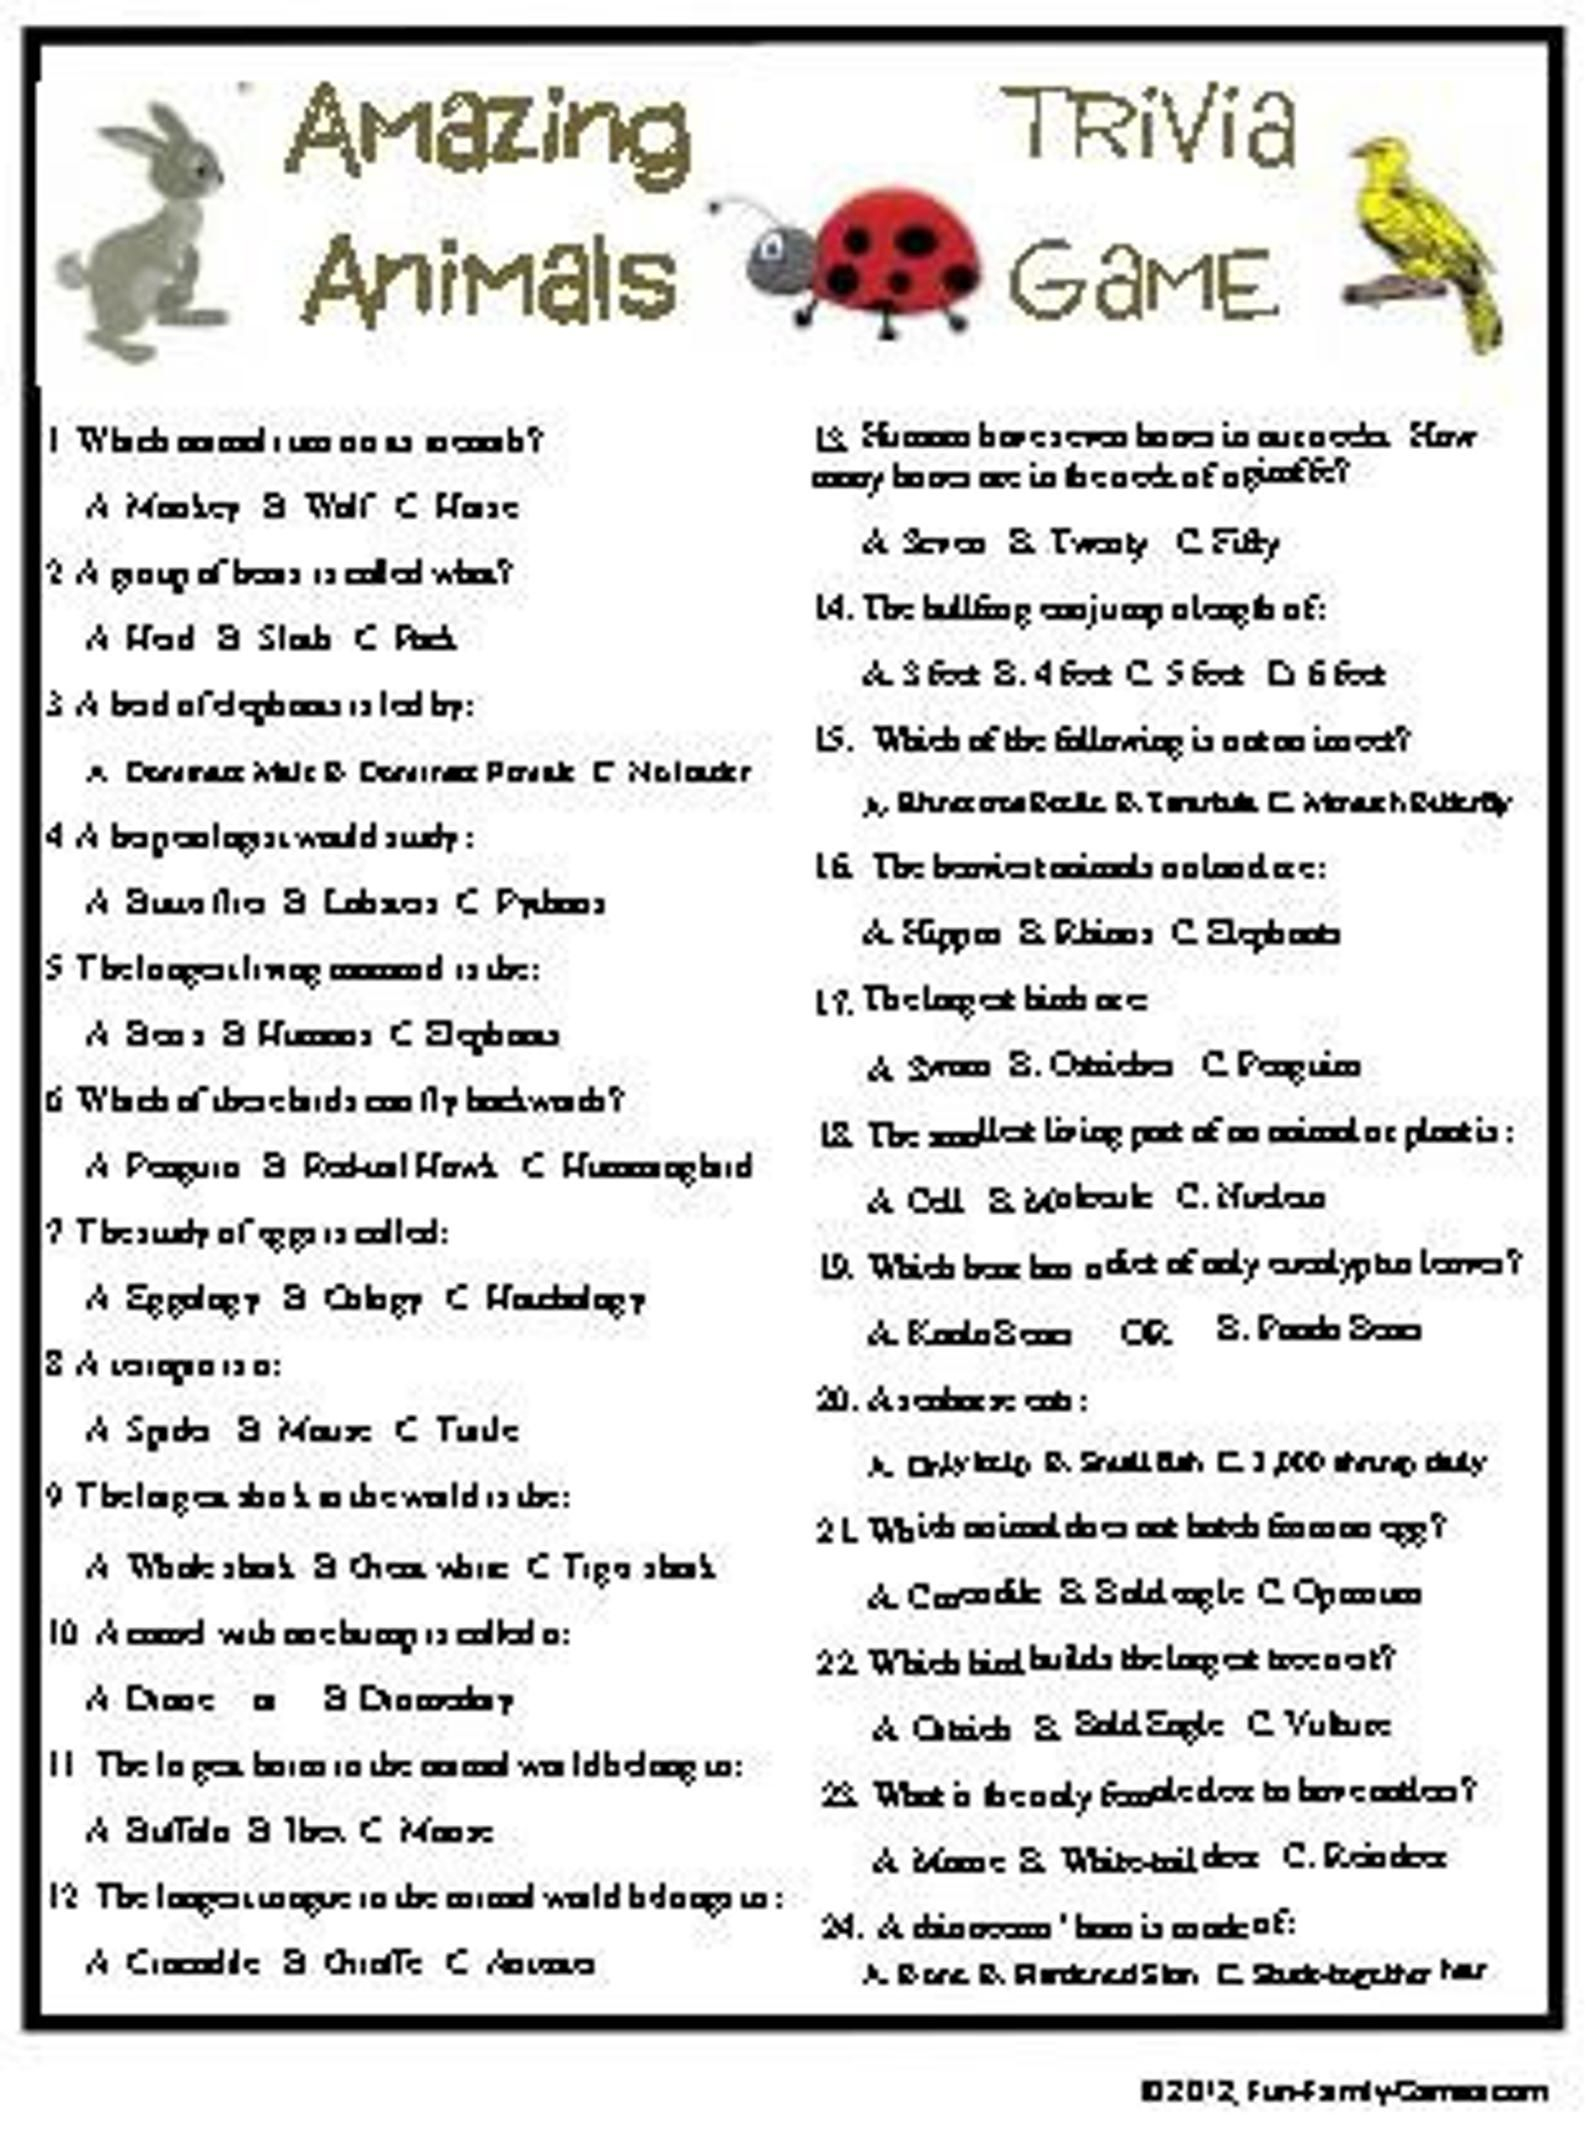 Amazing Animals Trivia Game Etsy Trivia Questions For Kids Trivia